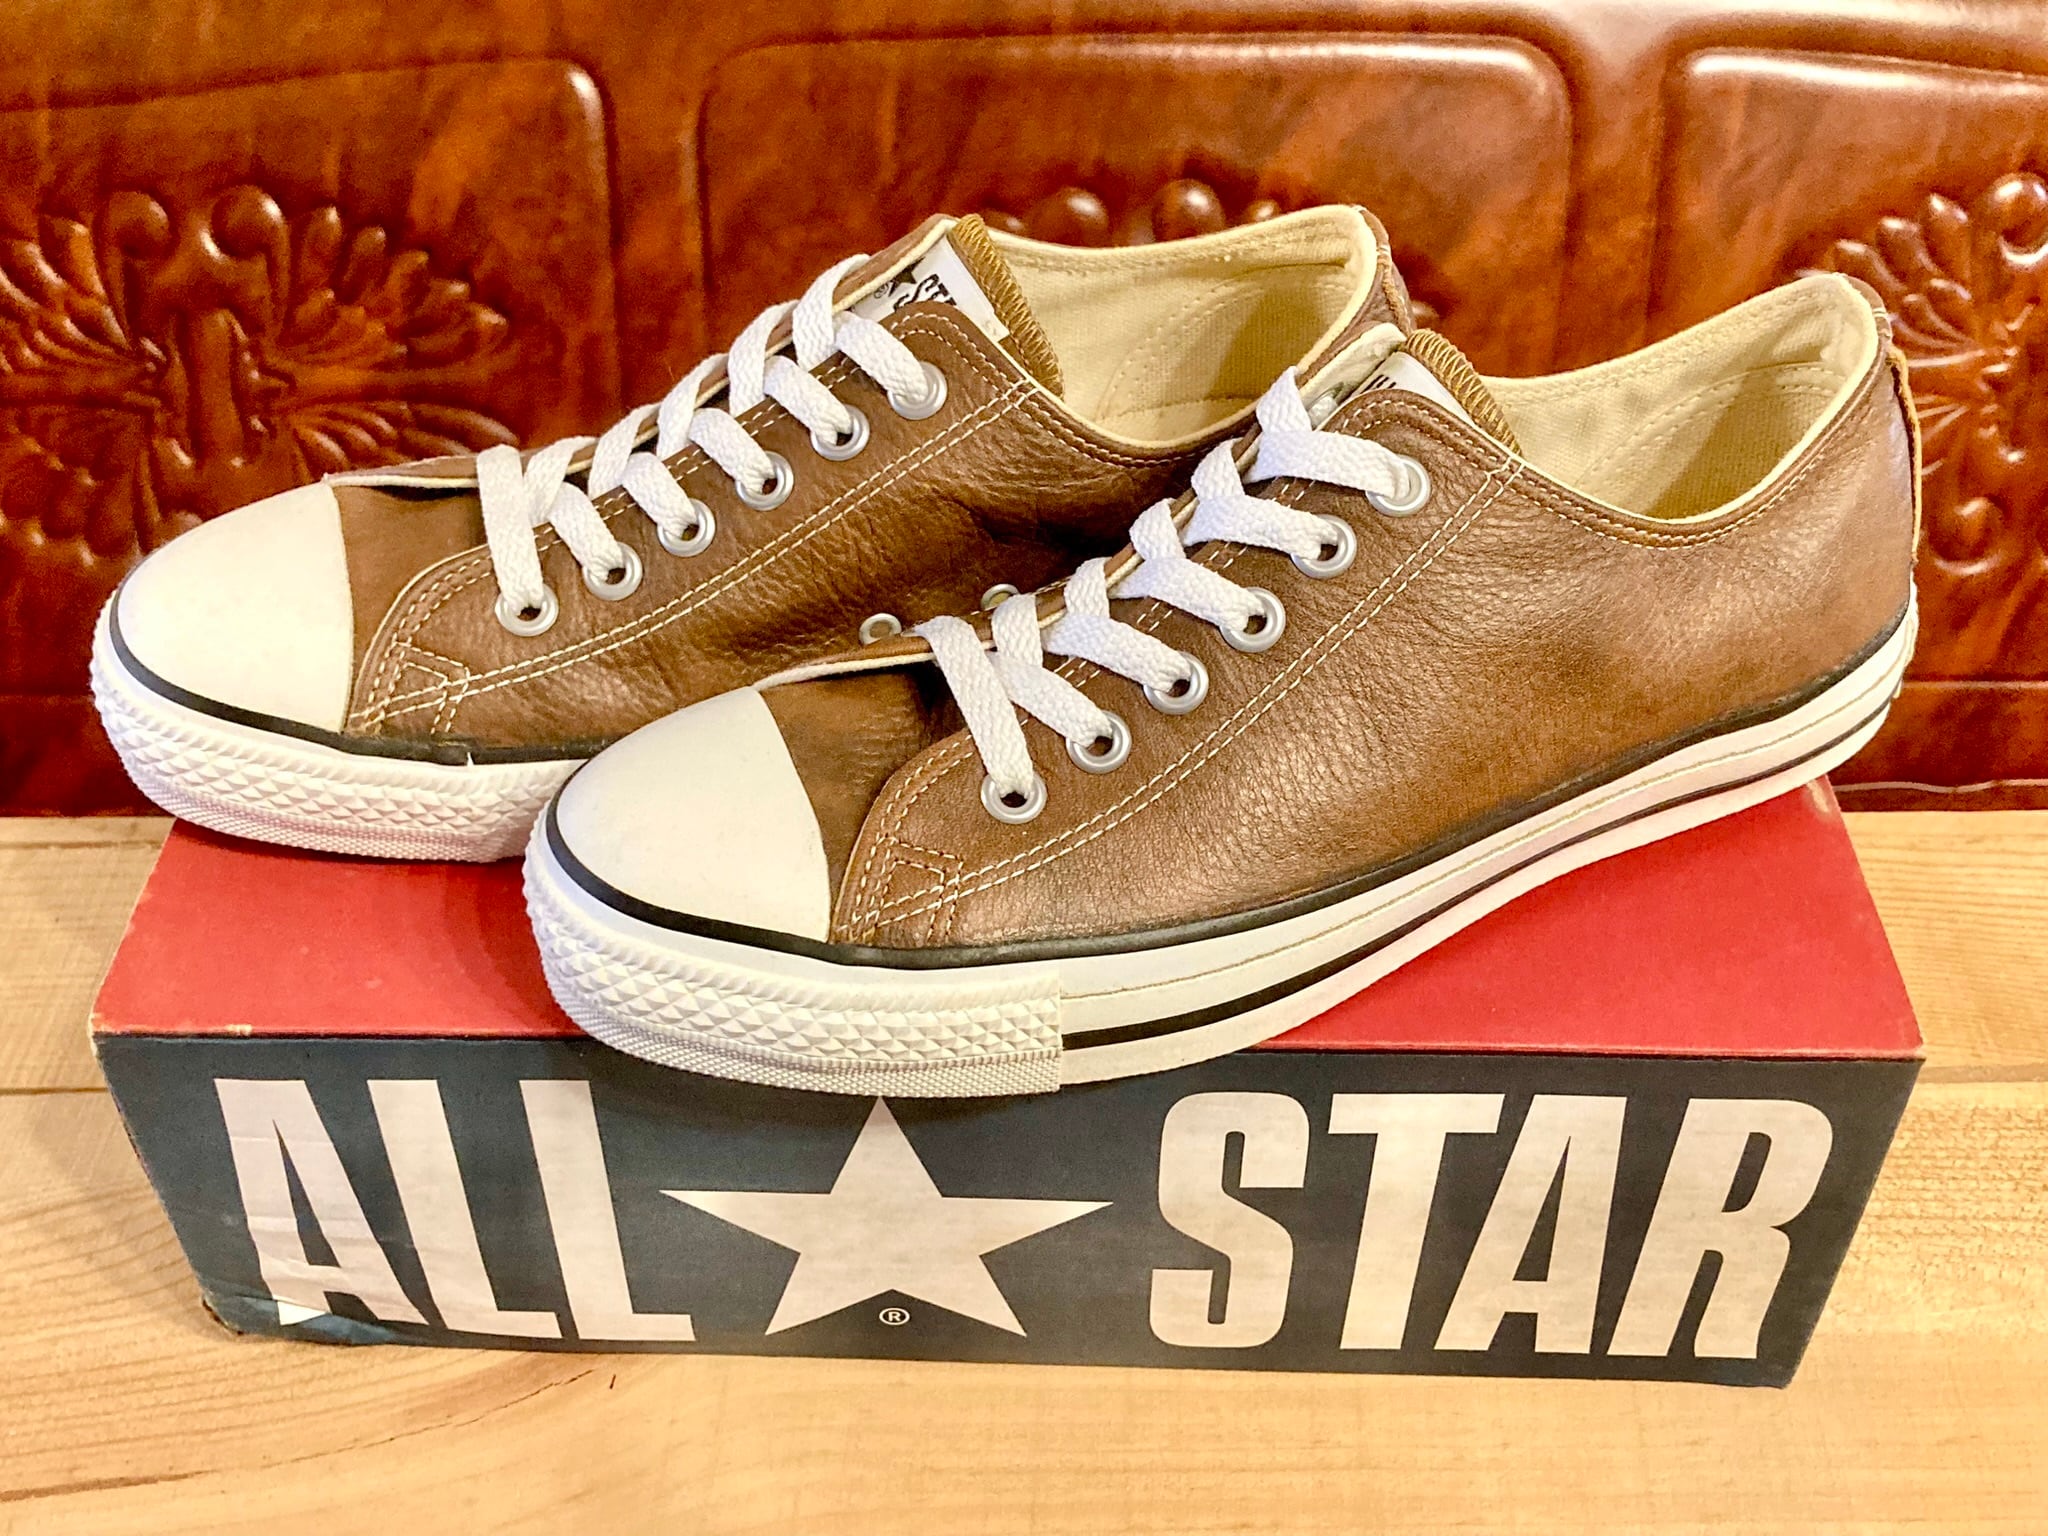 converse（コンバース） ALL STAR LEATHER（オールスター レザー）ブラウン 7.5 26cm 90s USA 239 |  freestars powered by BASE